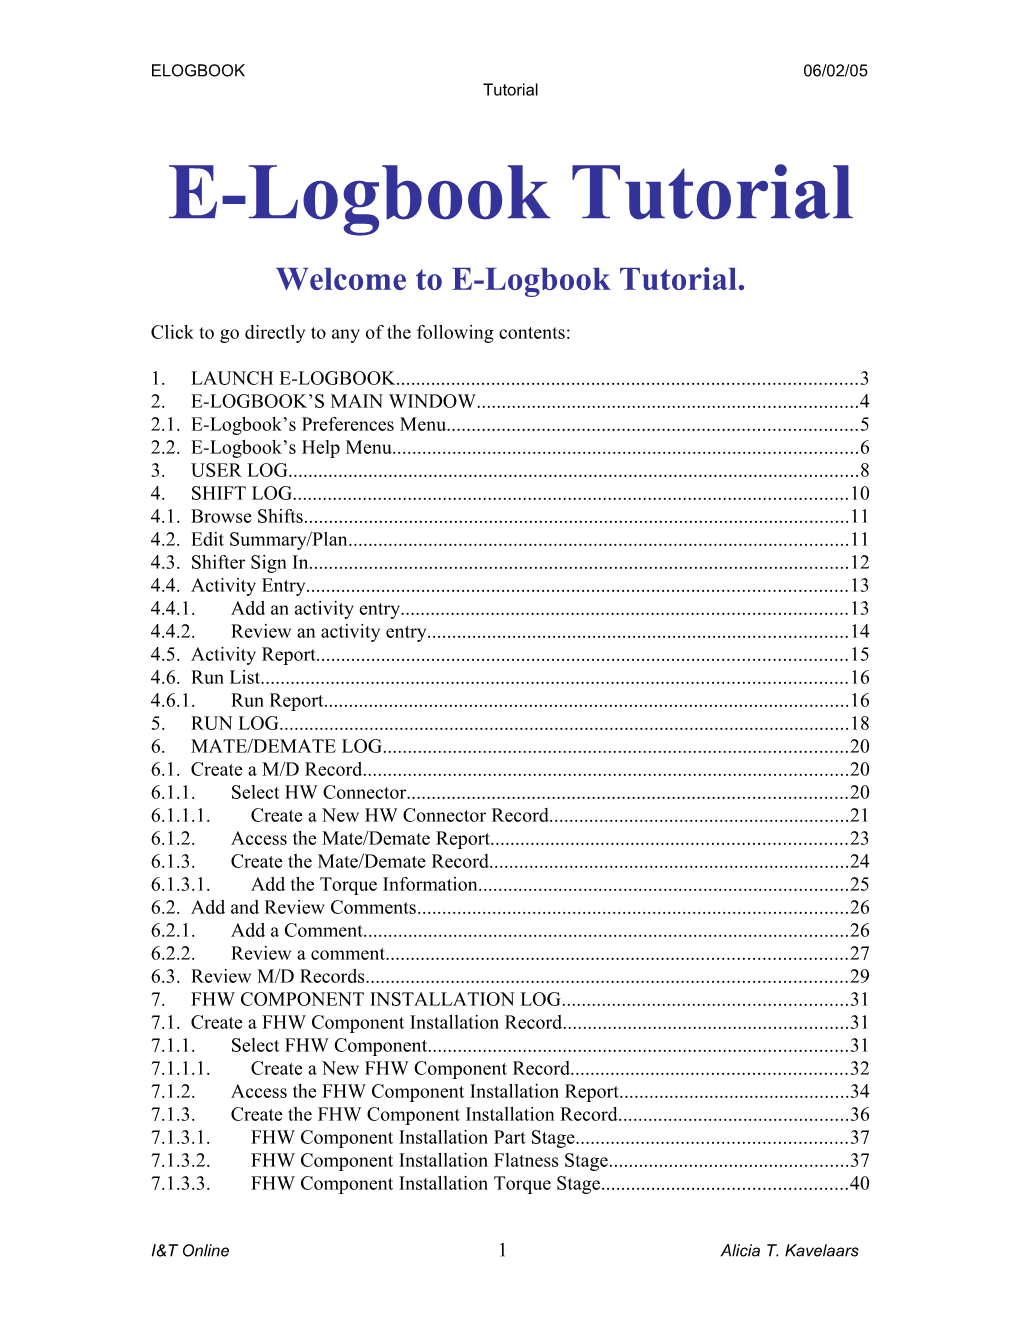 Welcome to the Elogbook Tutorial